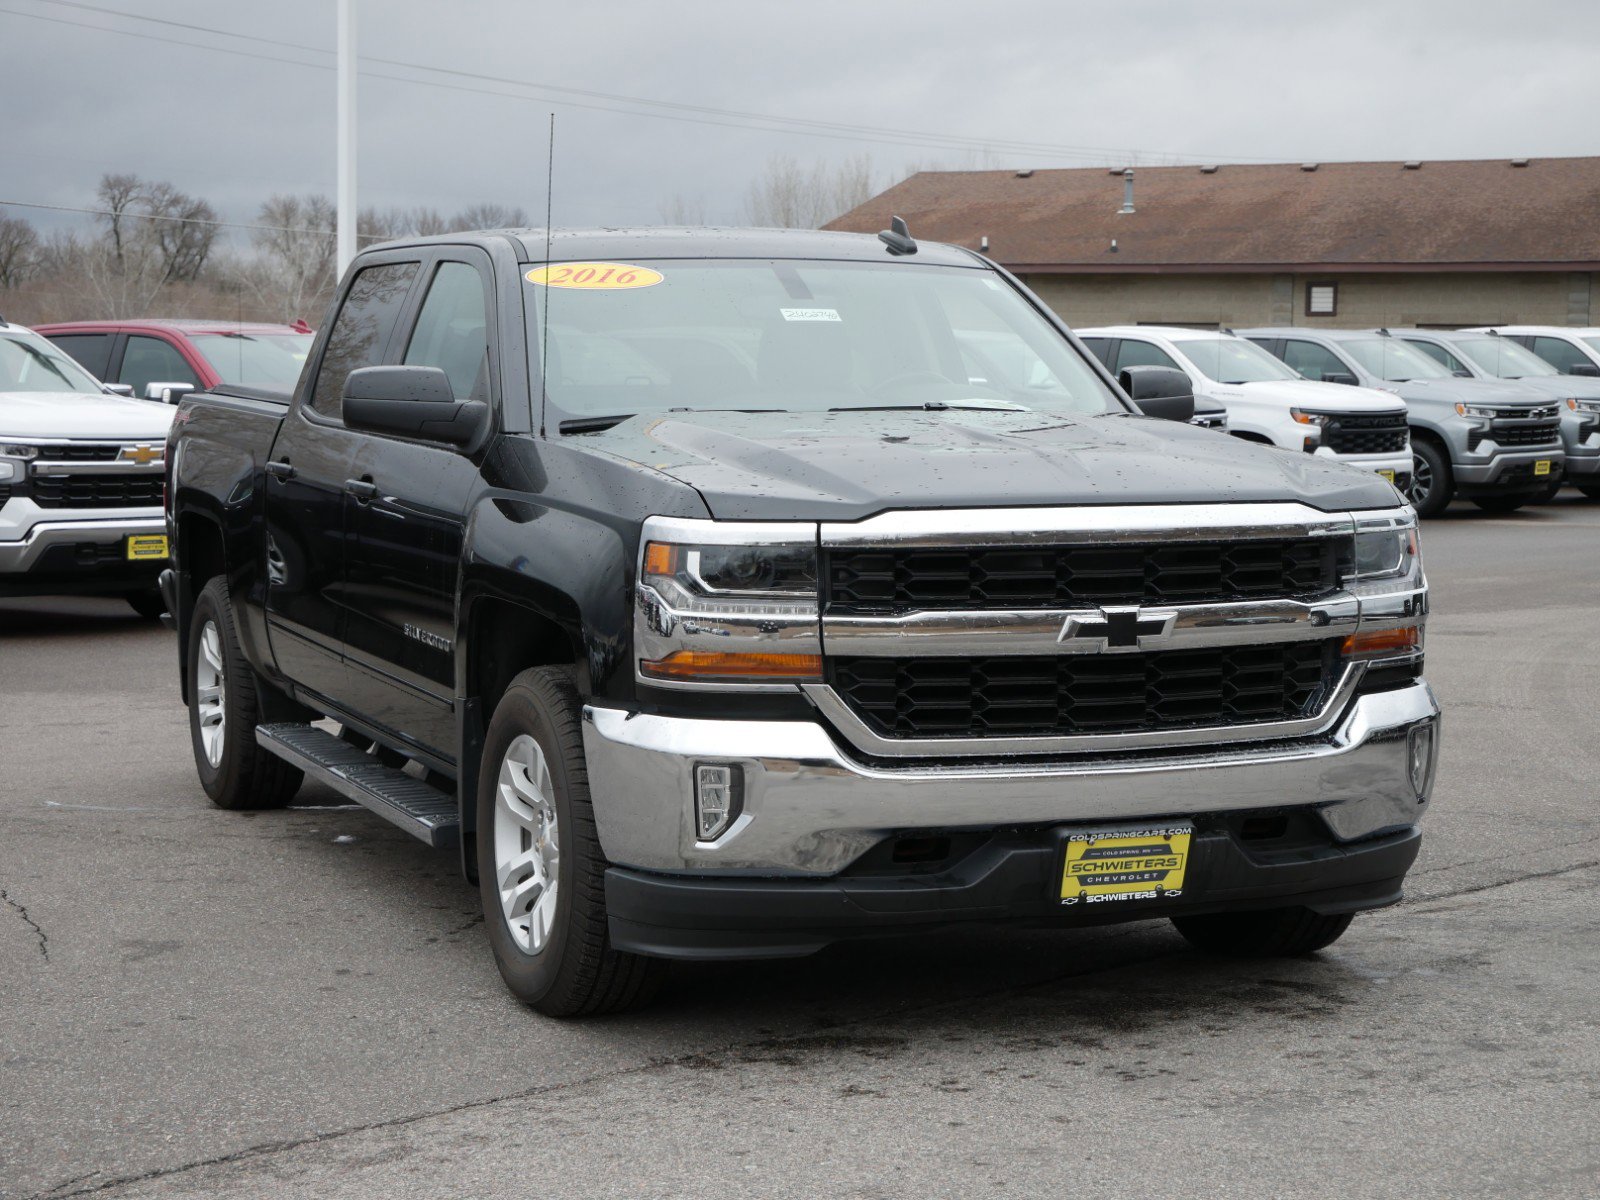 Used 2016 Chevrolet Silverado 1500 LT with VIN 3GCUKREC3GG113921 for sale in Cold Spring, Minnesota